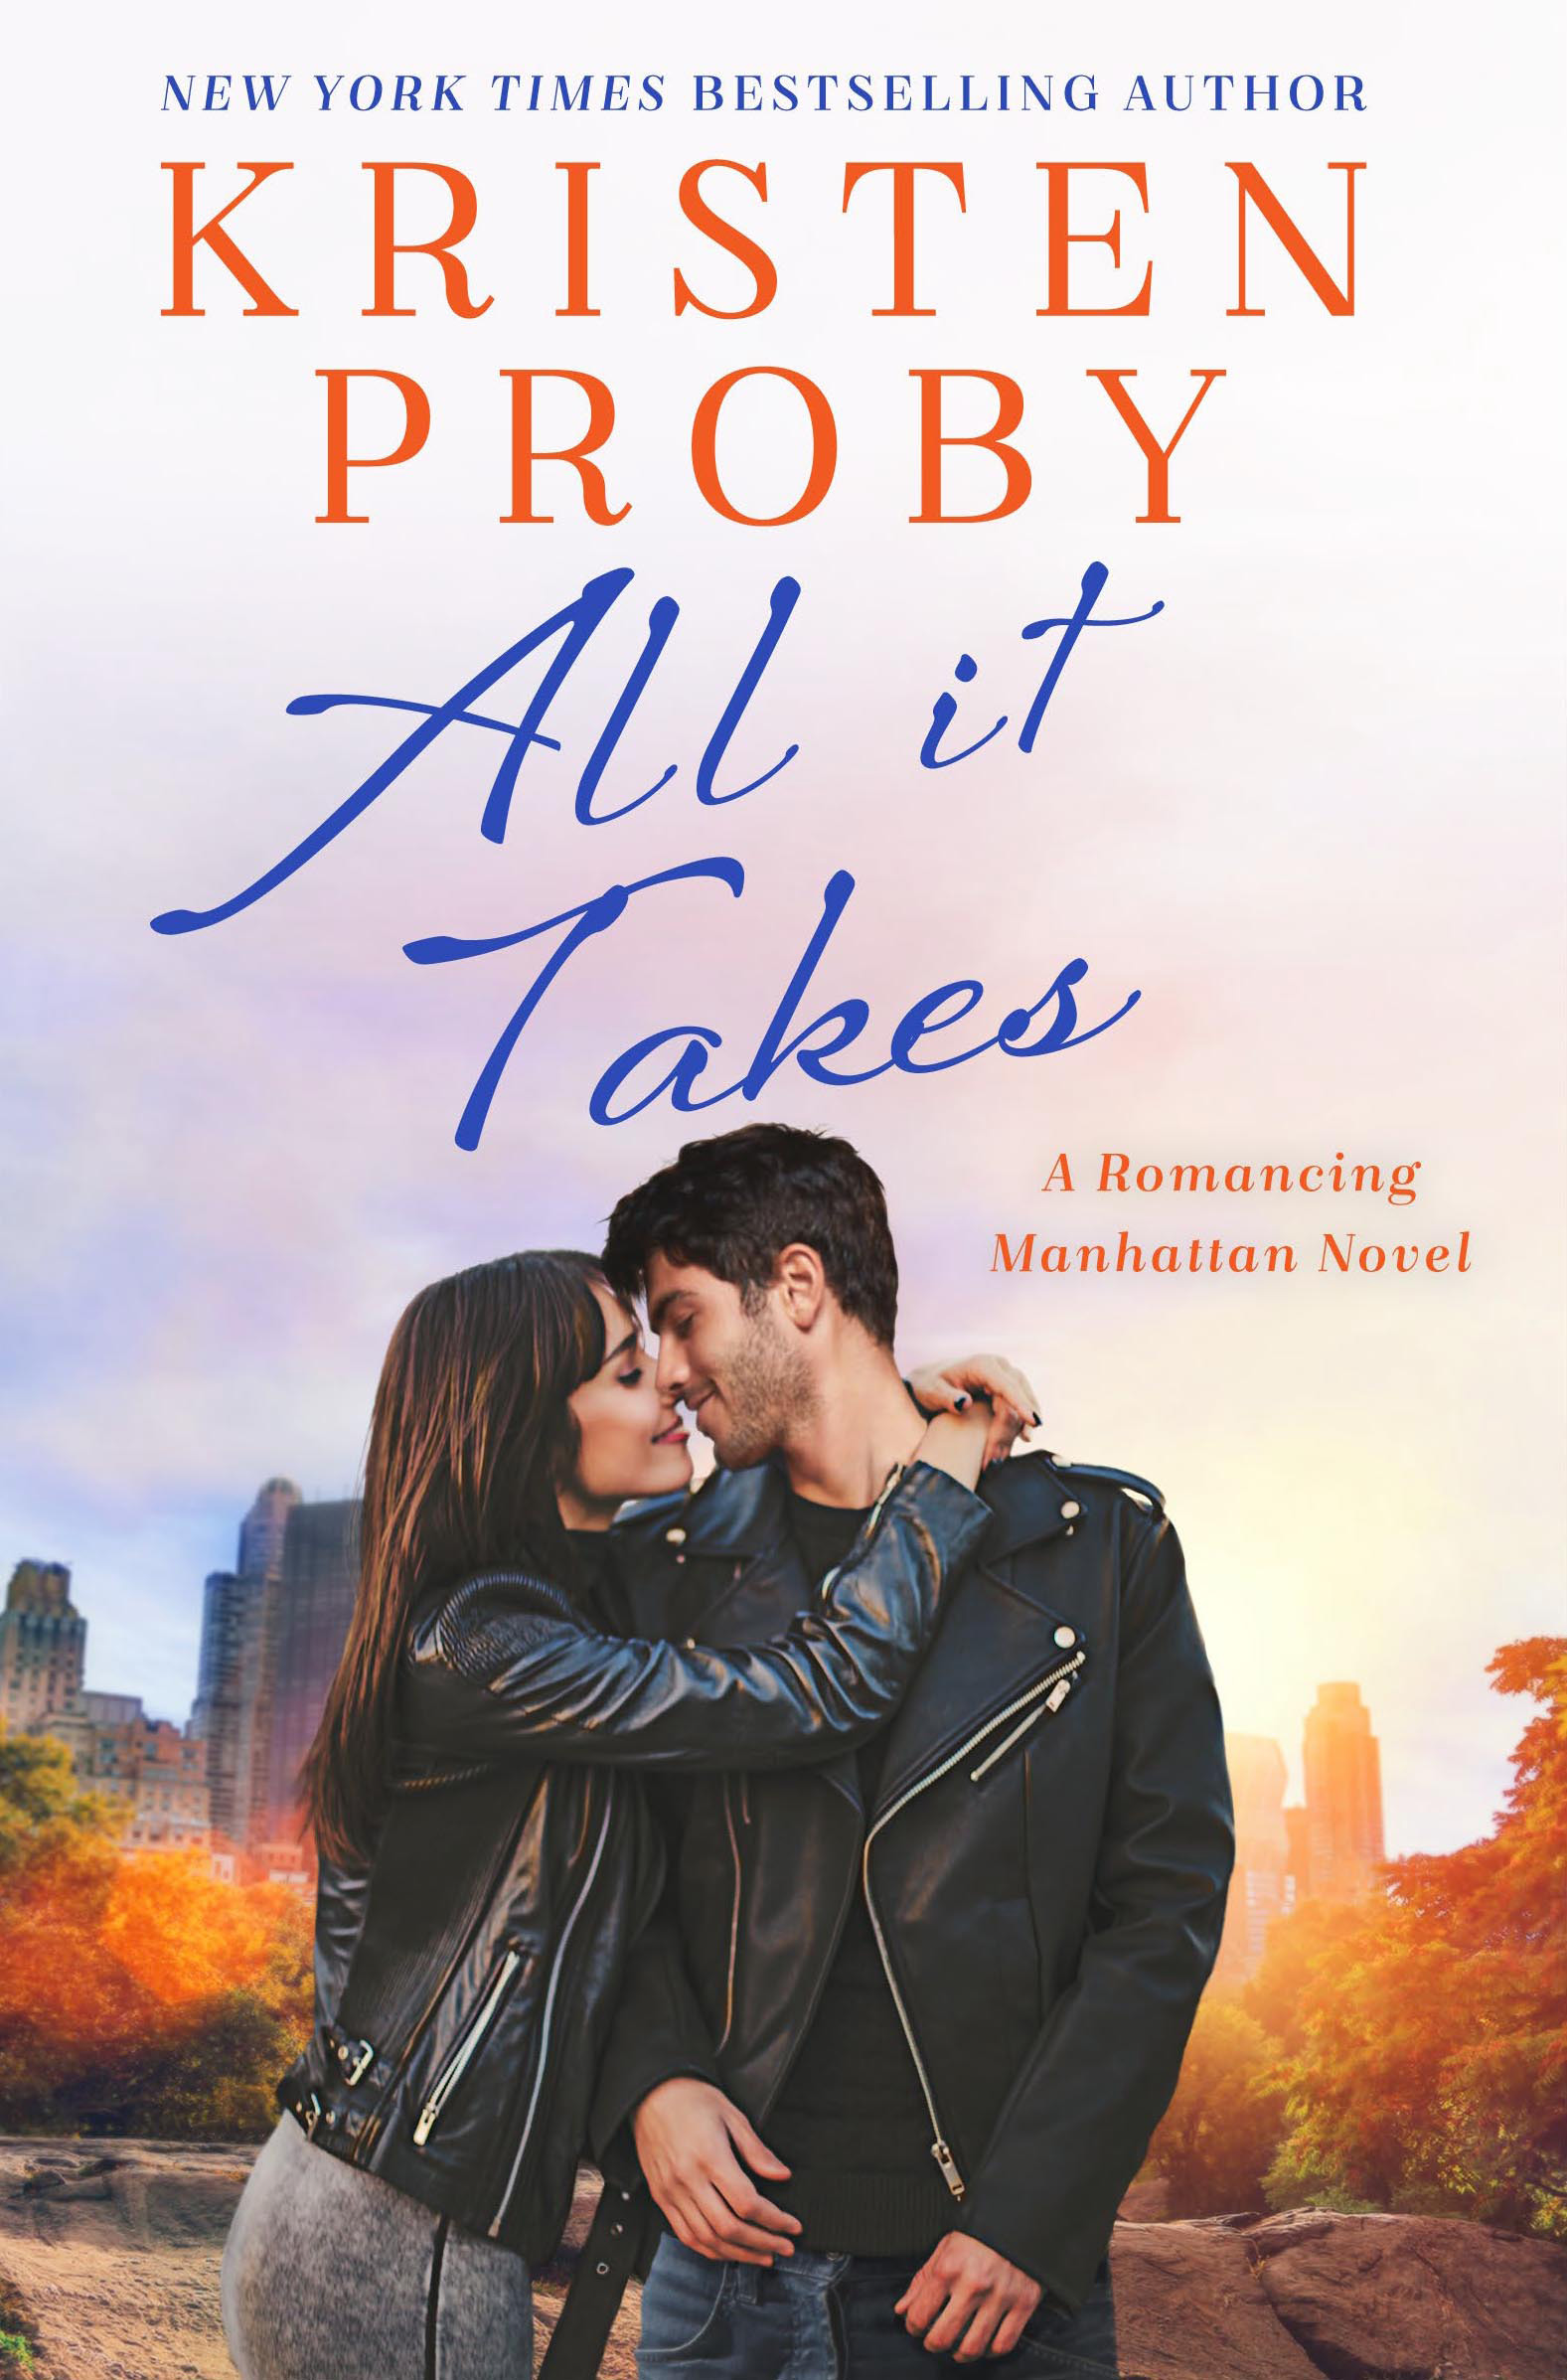 All It Takes by Kristen Proby 🗽🌆 💖